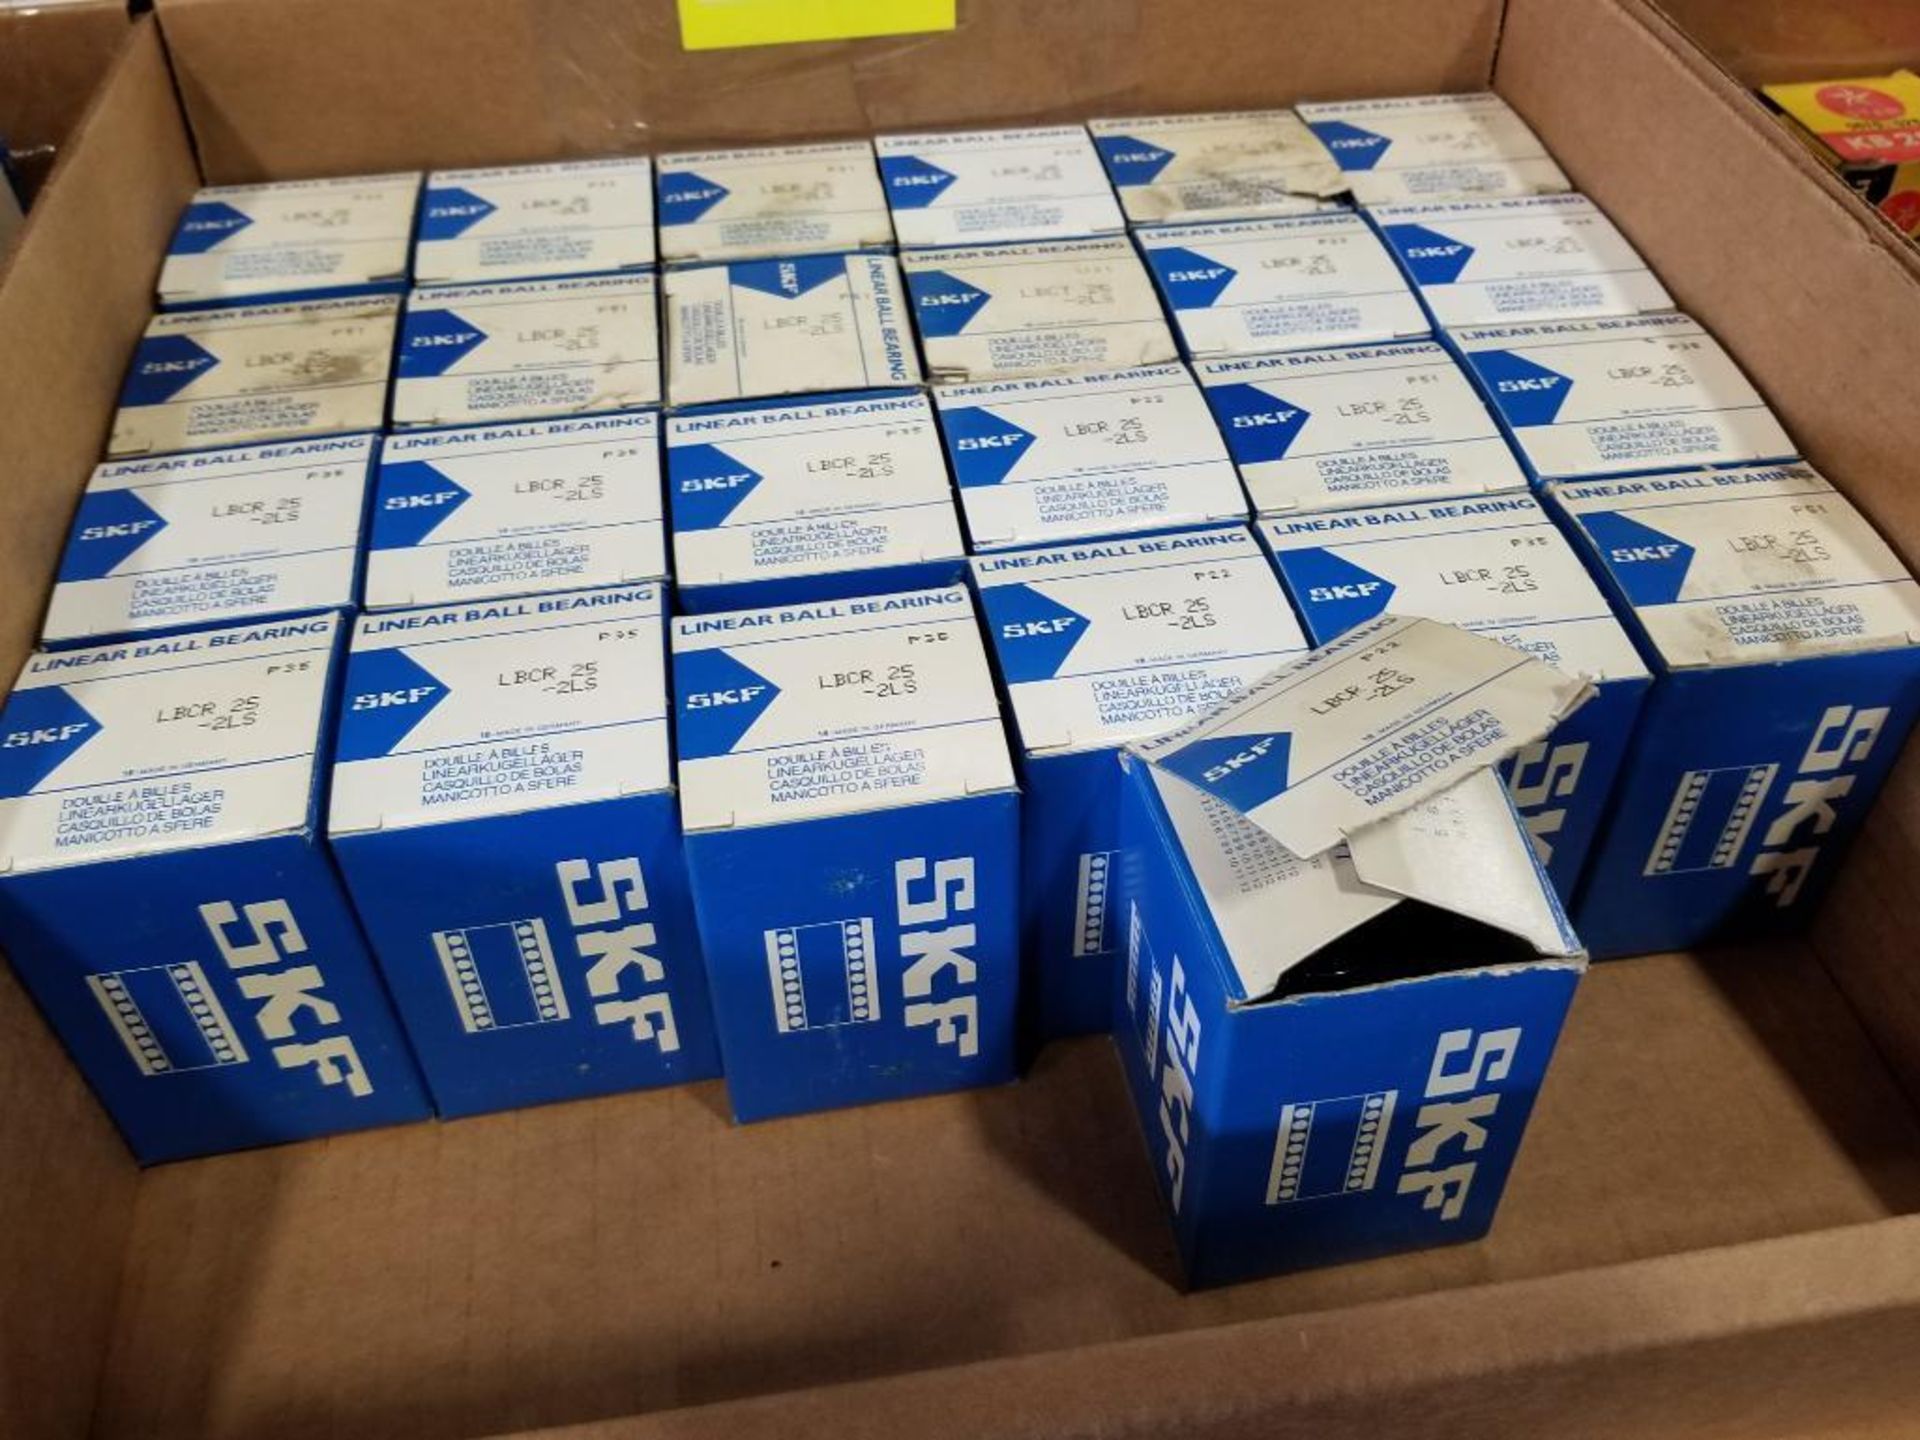 Qty 25 - SKF linear bearings. Part number LBCR-25-2LS. New in box. - Image 6 of 6